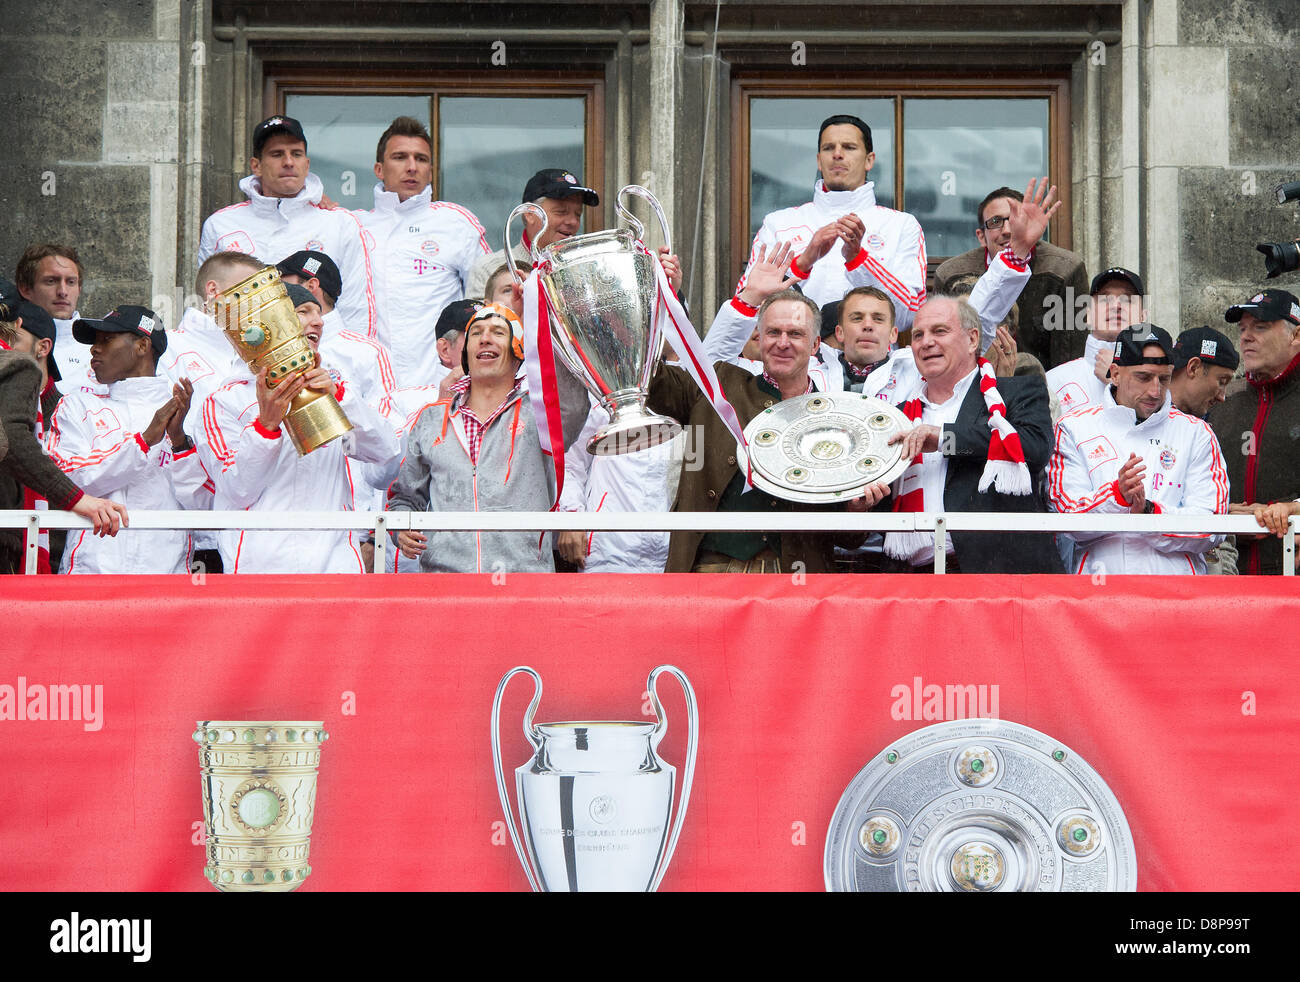 Munich, Germany. 2nd June, 2013. Bayern's players celebrate on the balcony of the town hall in Munich, Germany, 02 June 2013. FC Bayern Munich wins German Championship, Champions League and DFB Cup for the season 2012/13. PHOTO: MARC MUELLER/dpa/Alamy Live News Stock Photo